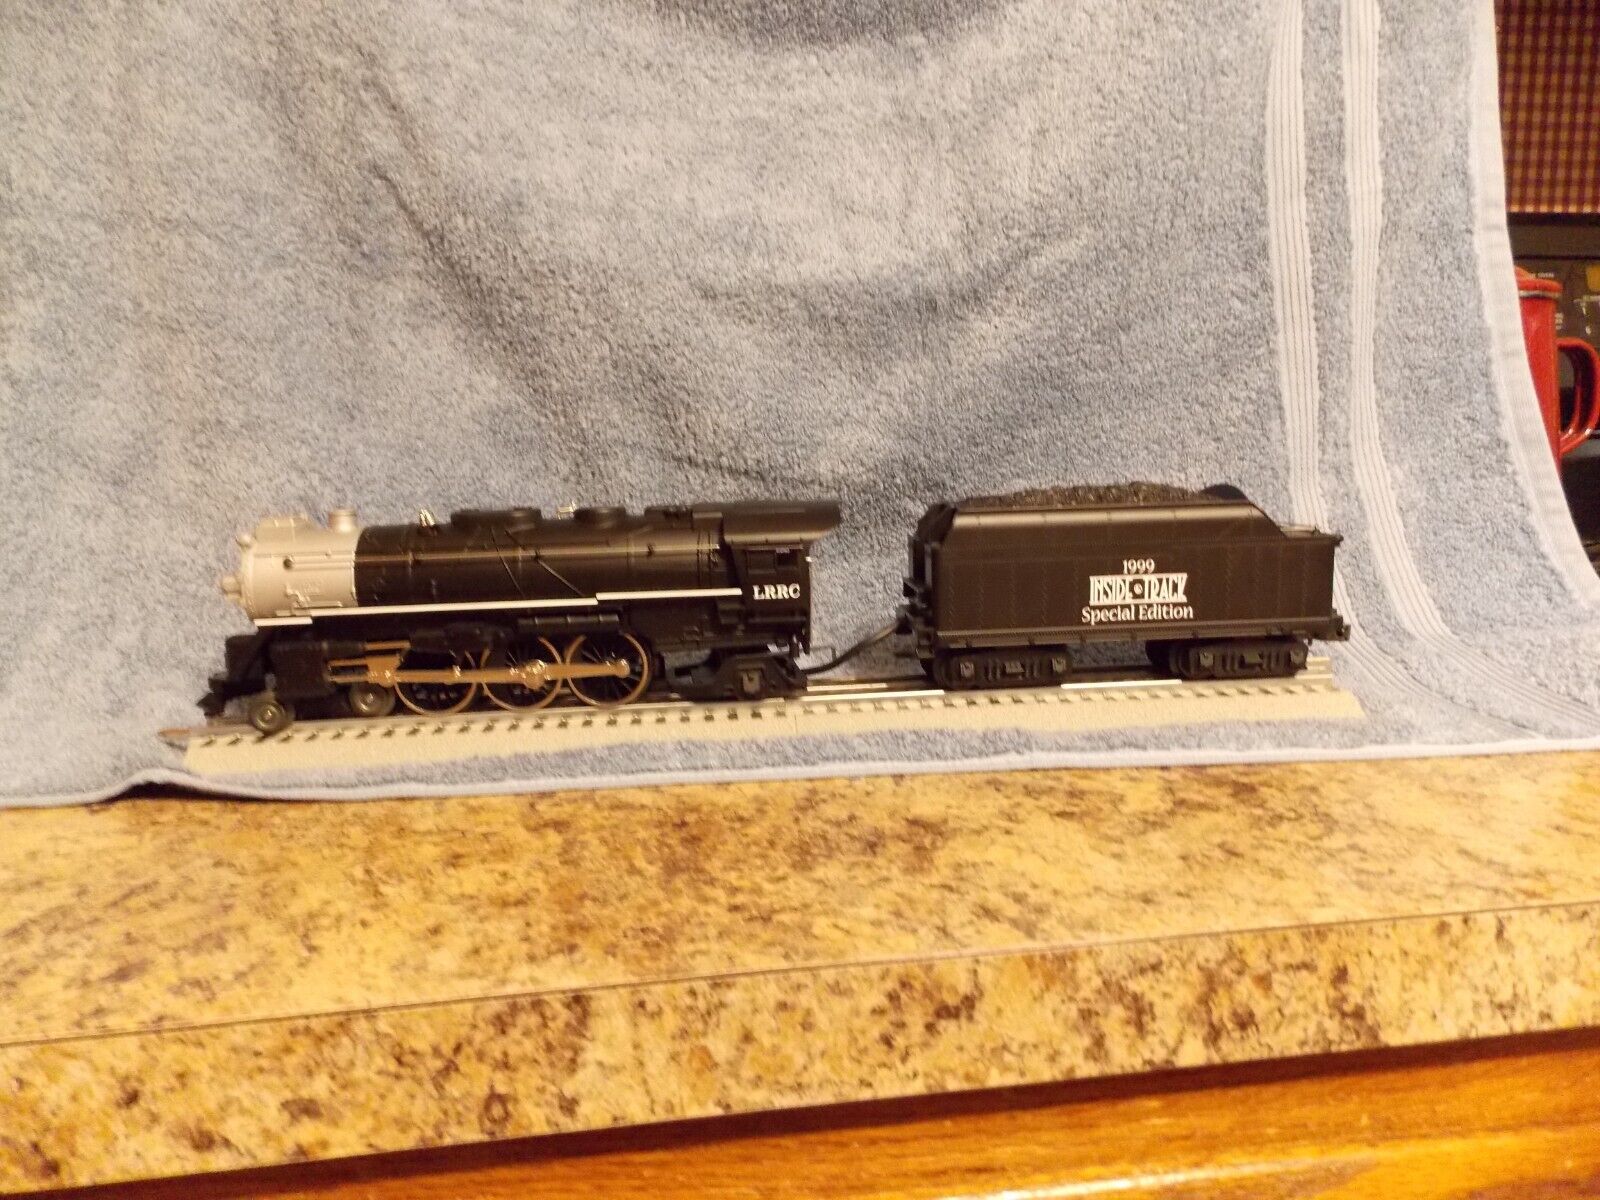 LIONEL 6-18684 LRRC SPECIAL EDITION 4-6-2 STEAM LOCO AND AMP TENDER O GUAGE